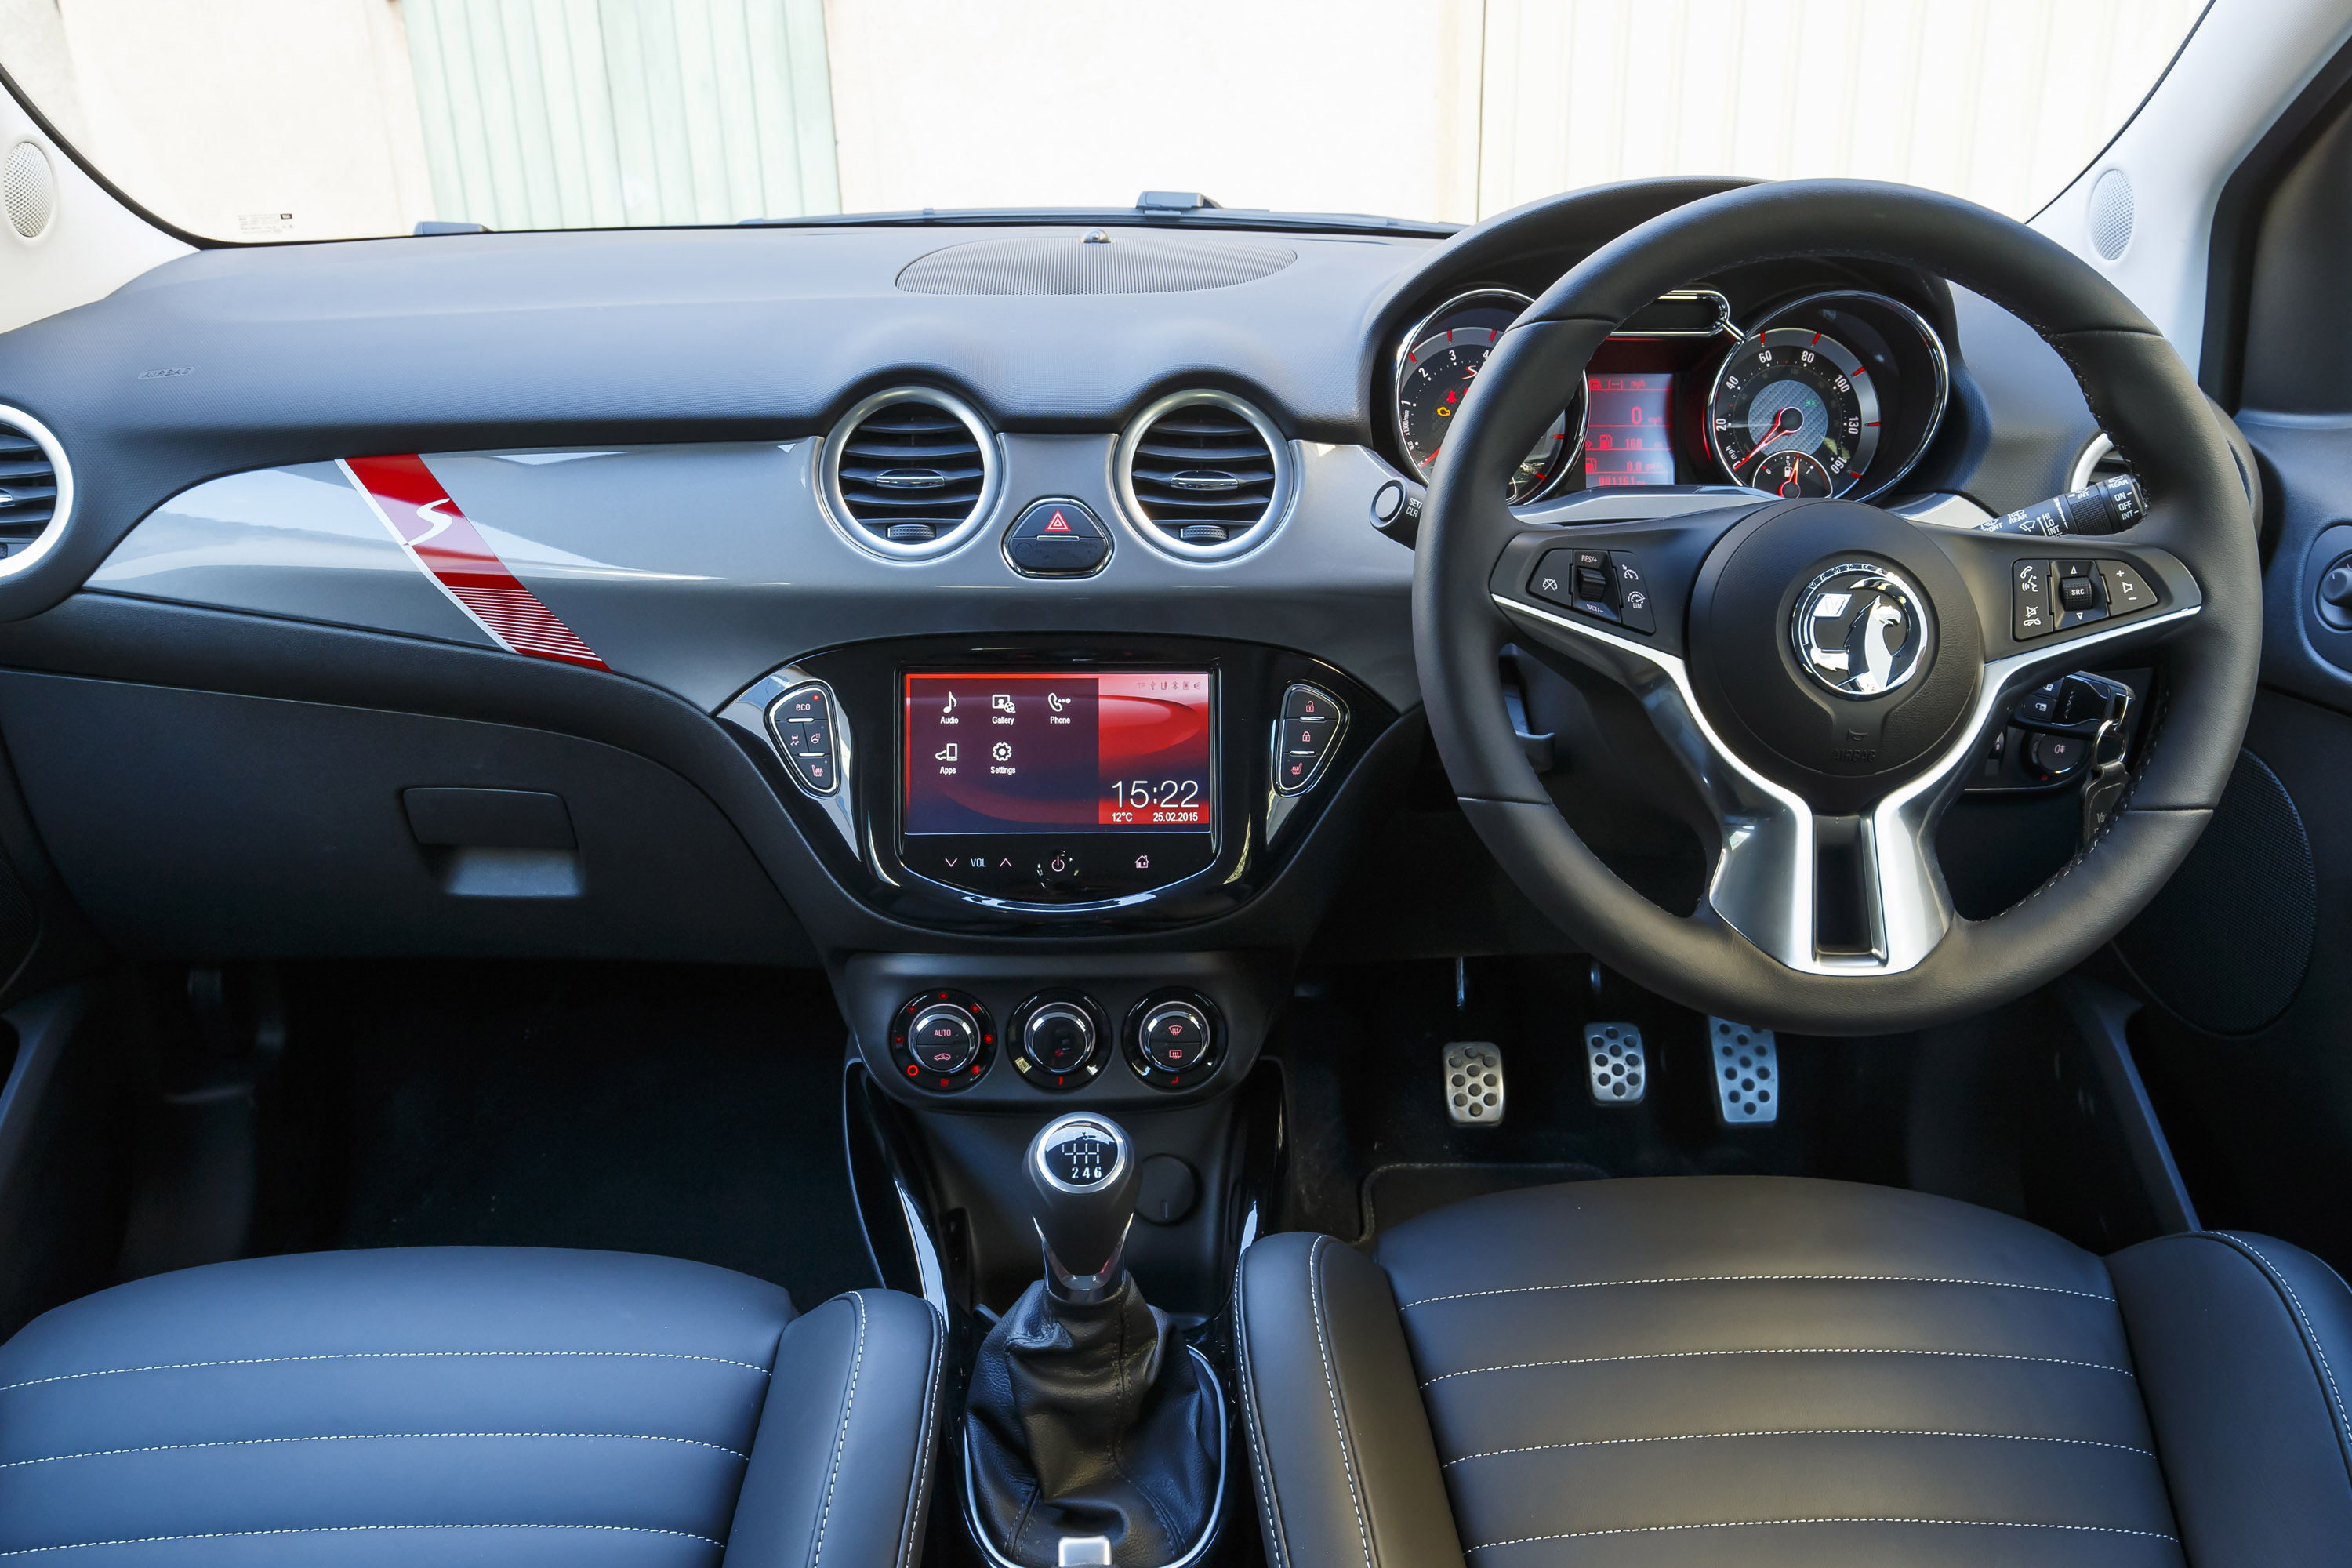 Vauxhall Adam S review - prices, specs and 0-60 time